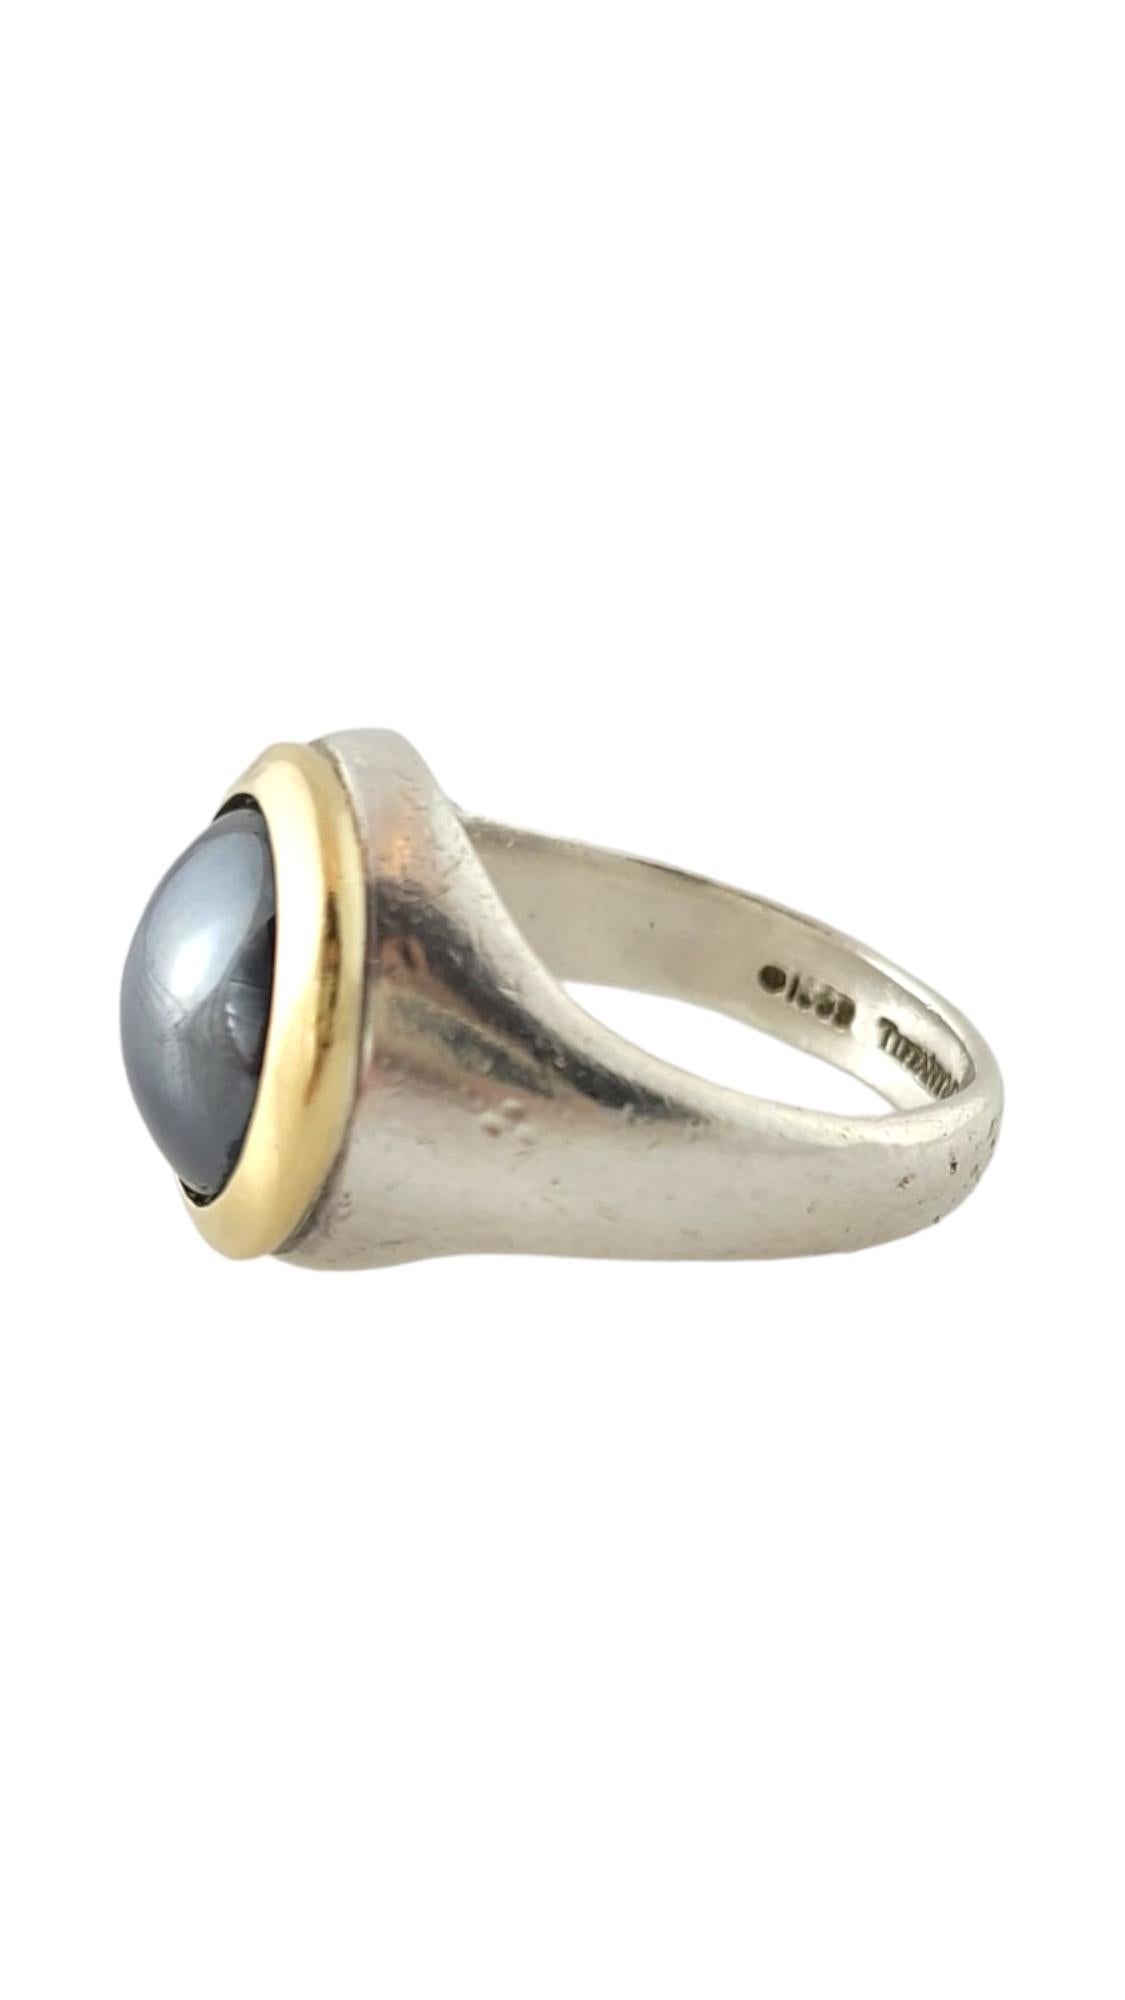 Tiffany & Co. 18K Yellow Gold & Sterling Silver Hematite Ring Size 6.5

This gorgeous vintage Tiffany & Co ring is crafted from sterling silver with 18K yellow gold surrounding a beautiful hematite stone in the center!

Ring size: 6.5
Shank: